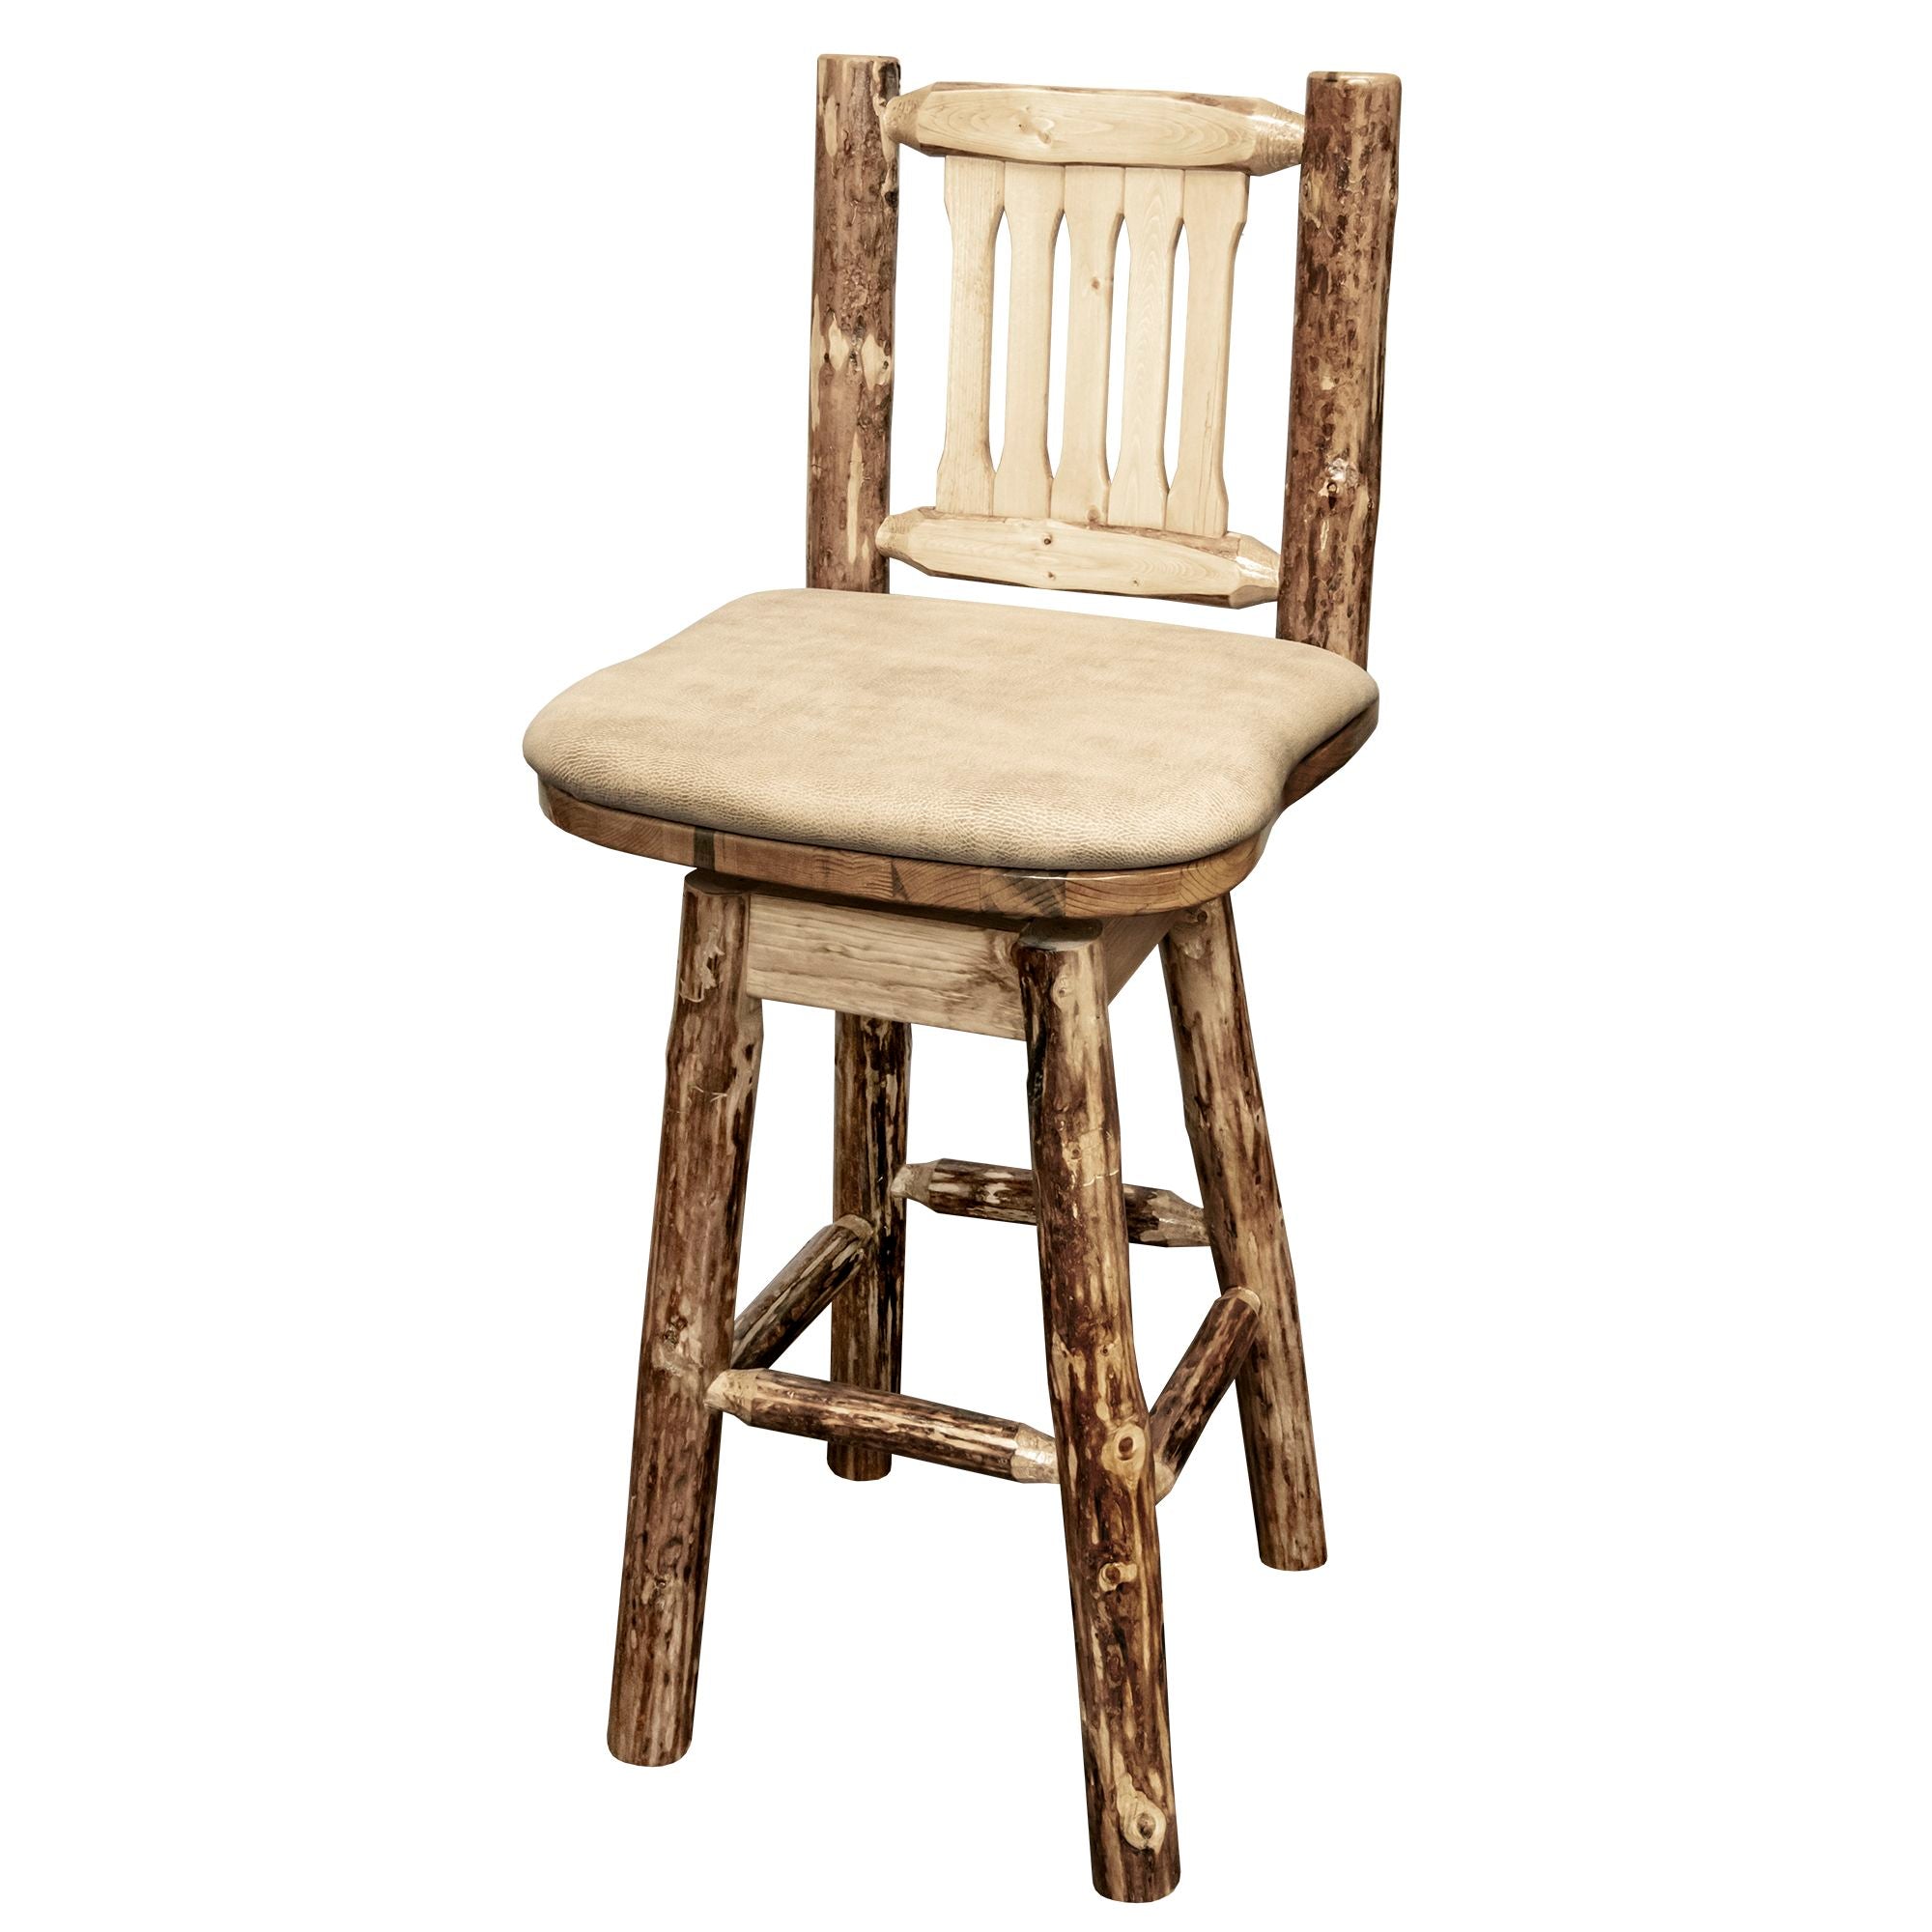 montana woodworks glacier country collection-barstool with back swivel mwgcbswsnrbuck buckskin patter upholstered seat